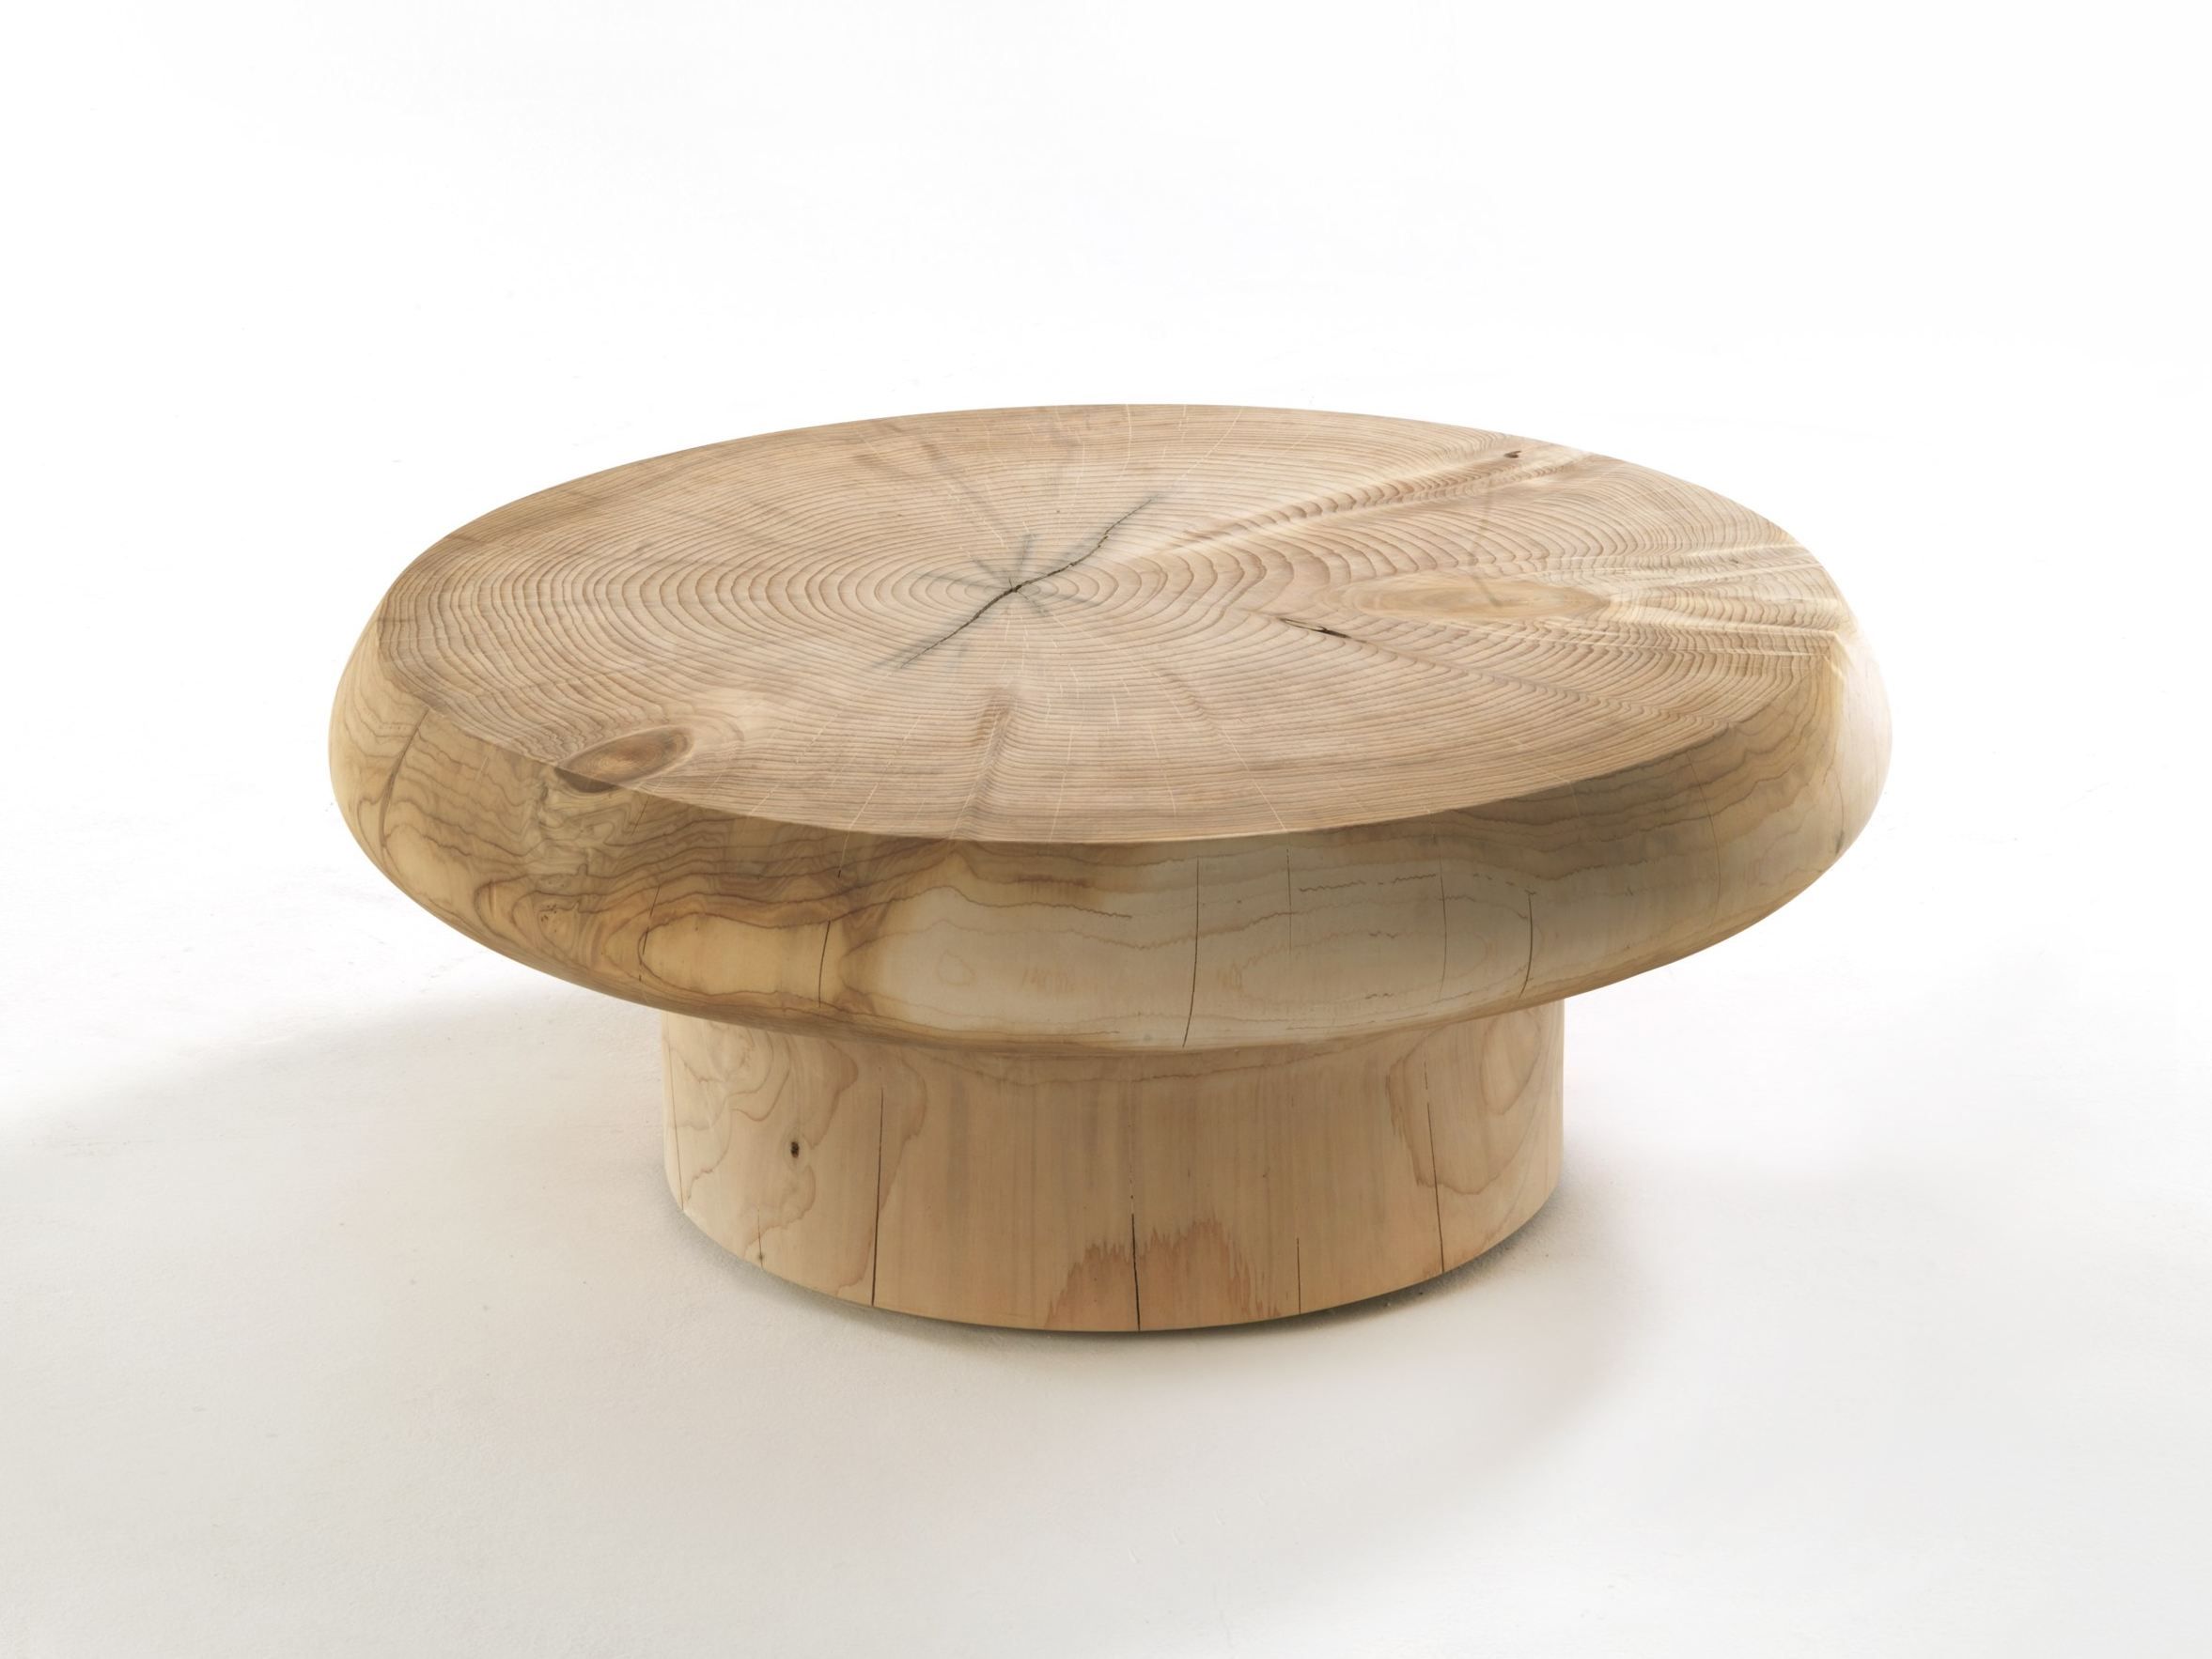 Low Round Wood Coffee Table Kenobi Coffee Table By Riva 1920 Design Low Wood Coffee Table Low Coffee Table (View 7 of 10)